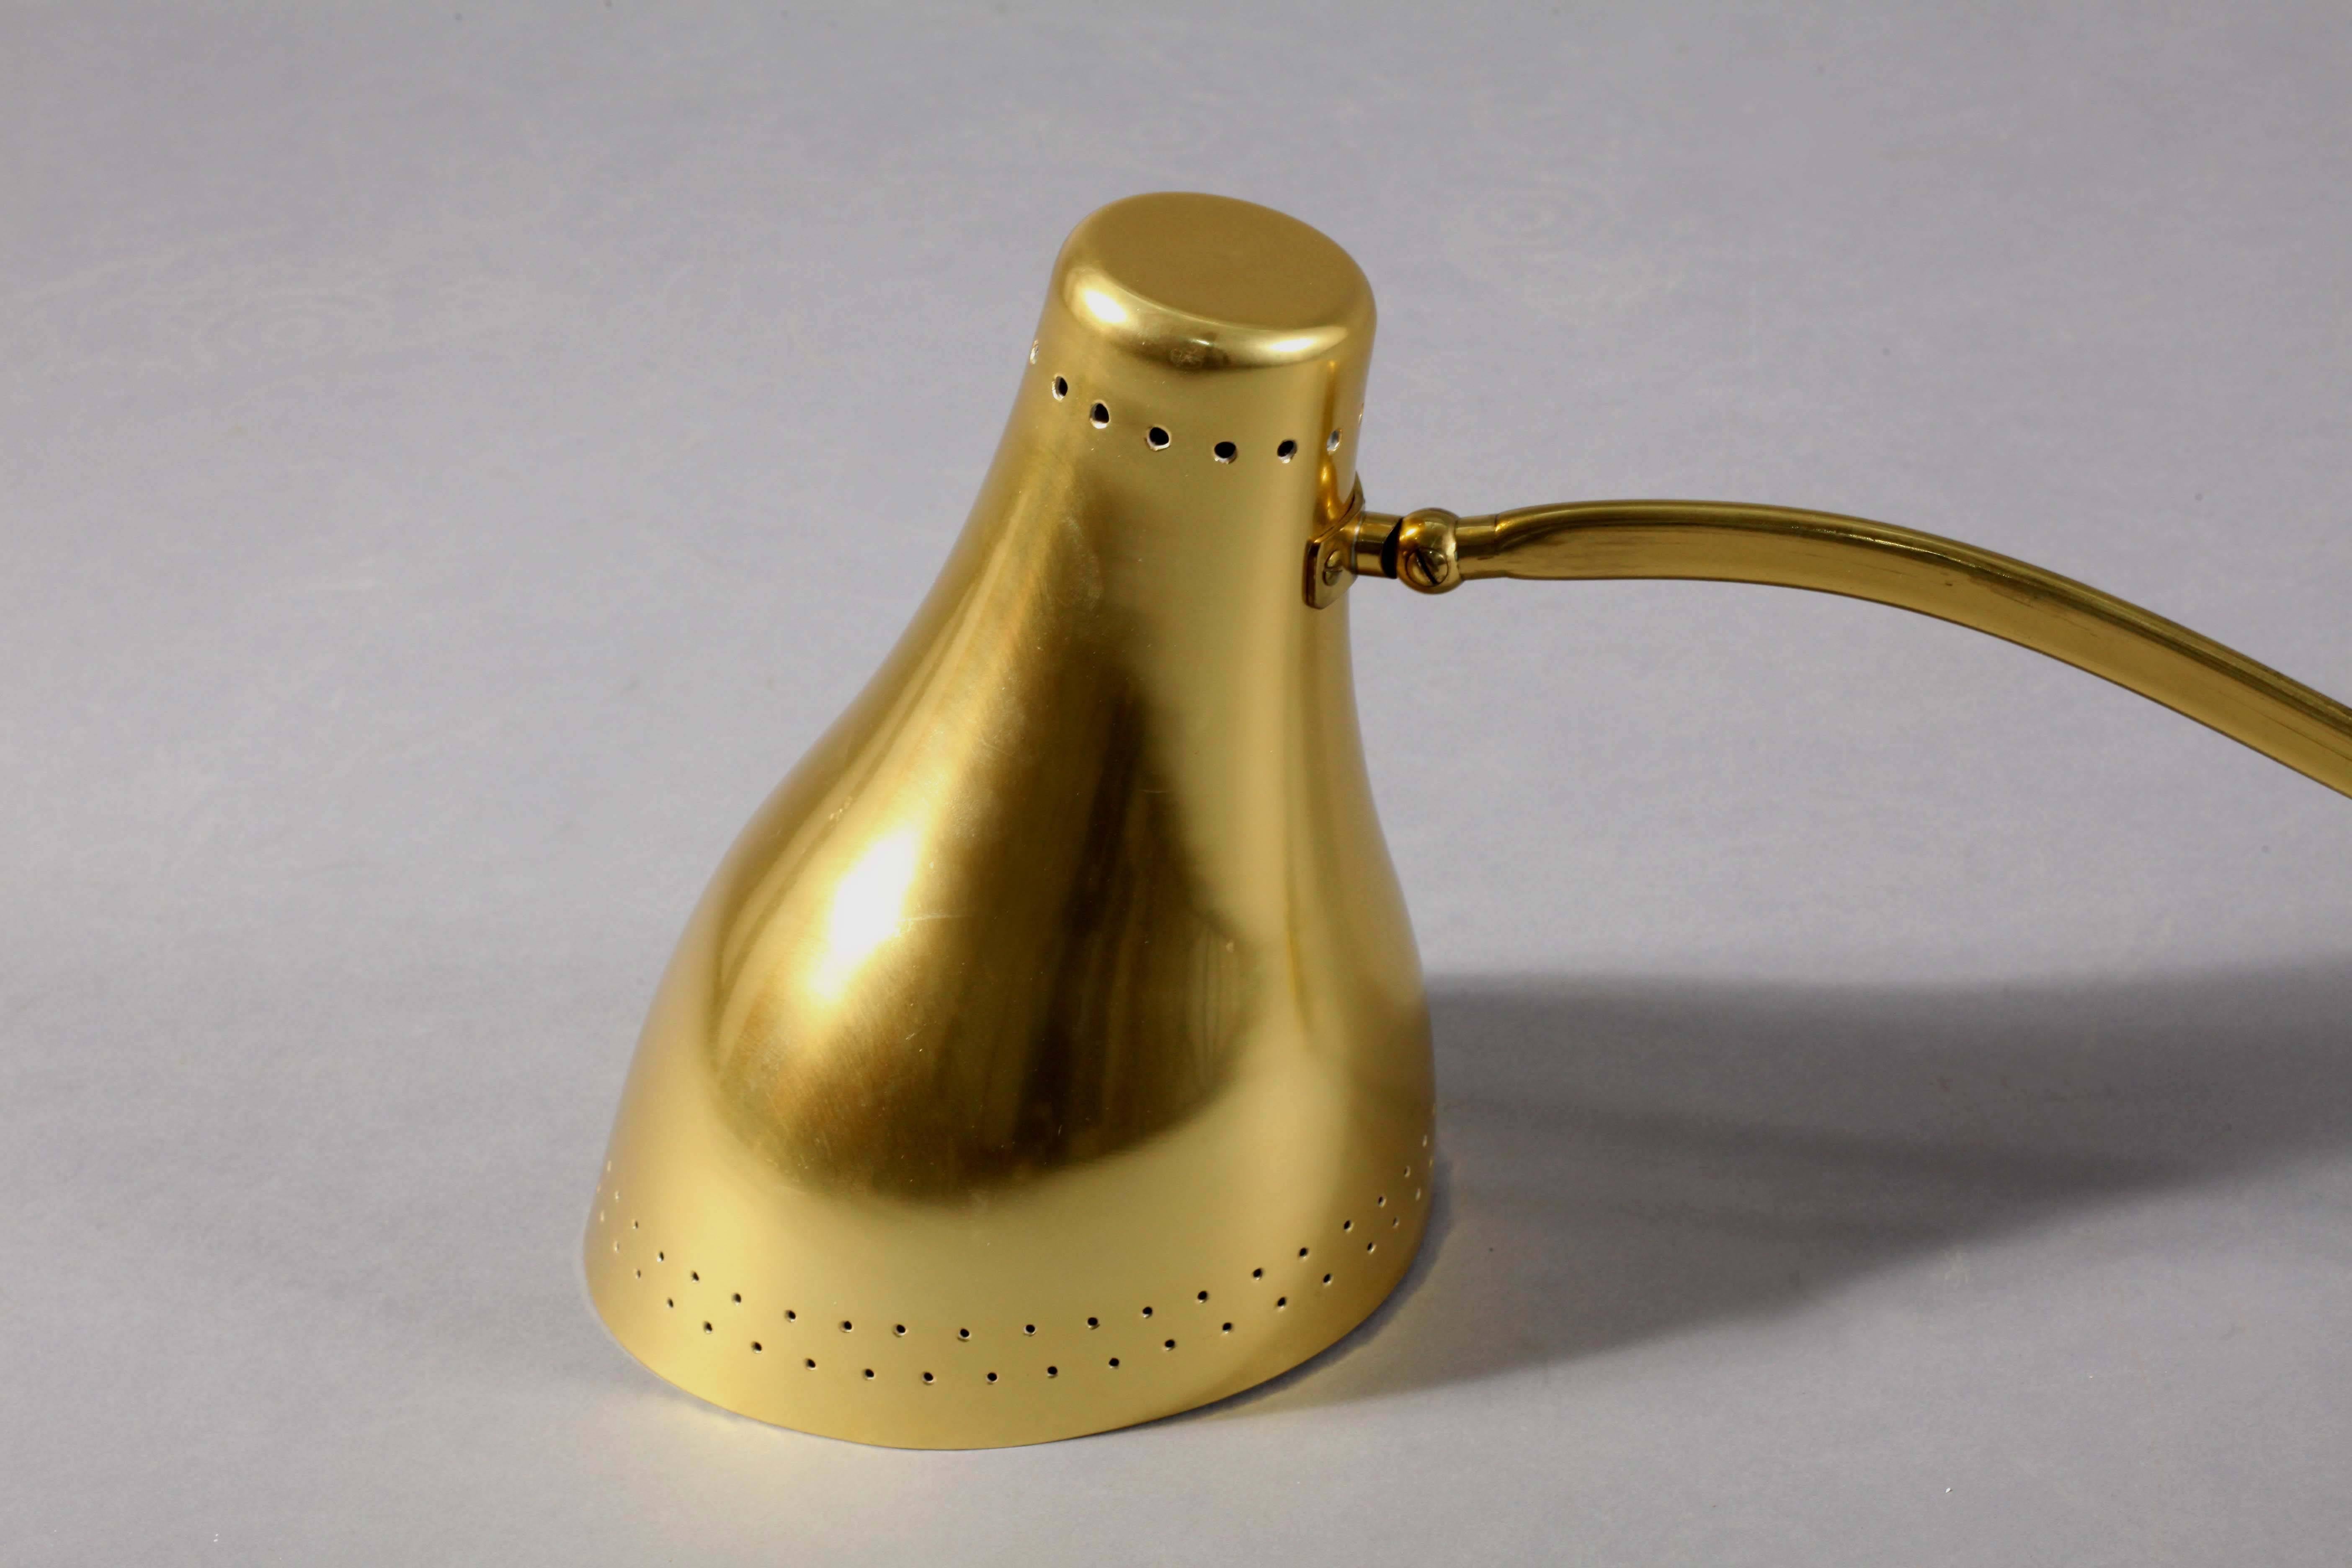 Wall sconce,
Rupert Nikoll,
Vienna, 1950,
Movable arm,
solid brass.